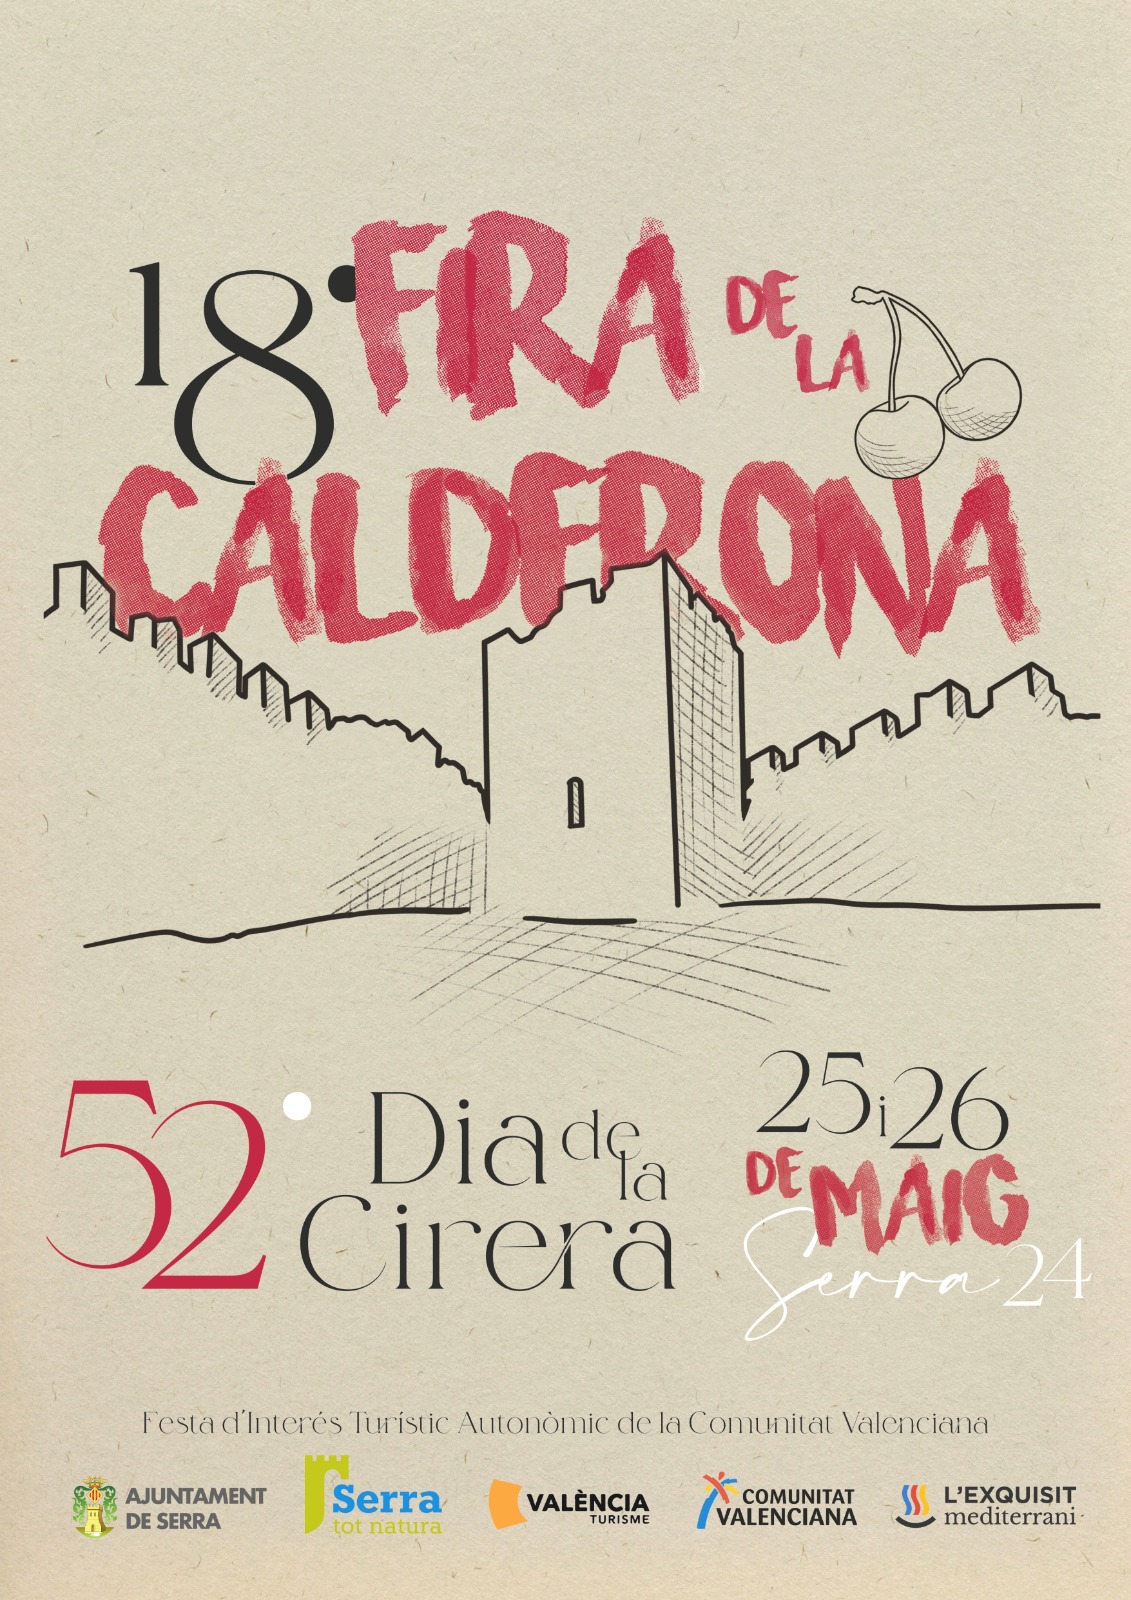 You are currently viewing Poster advertising the Fira de la Calderona 2024